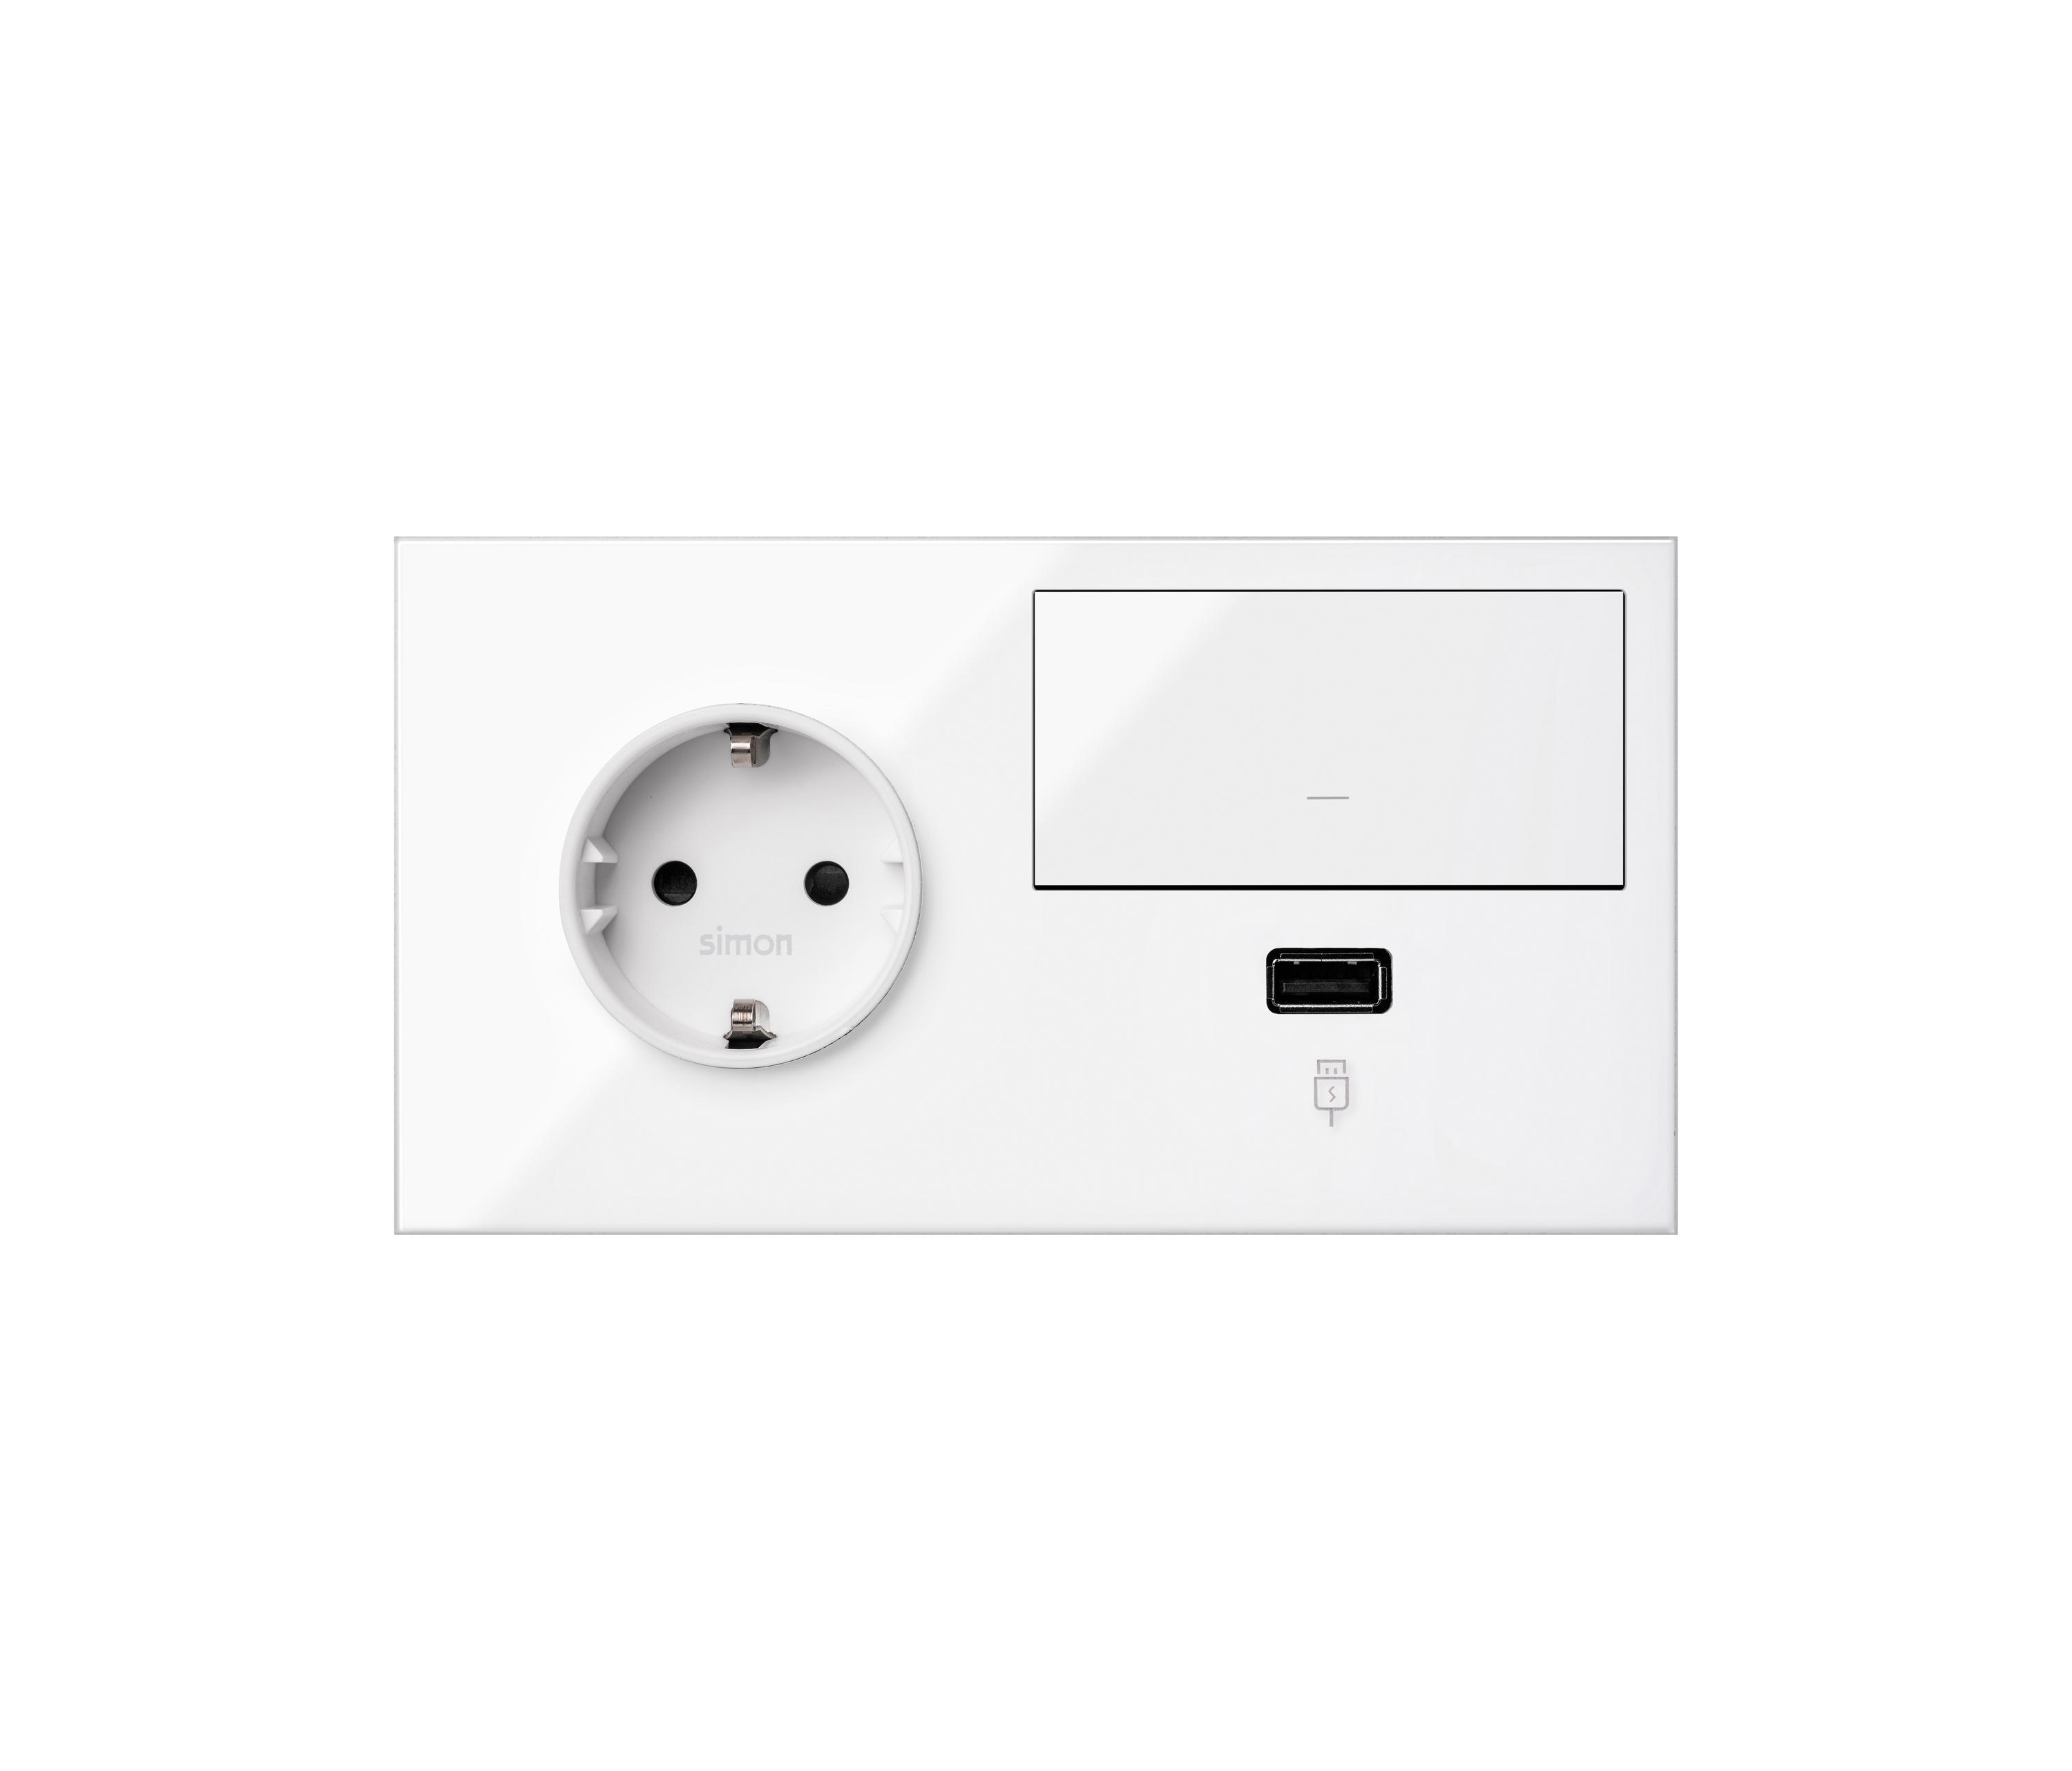 Best Buy: GE Z-Wave Plus Wireless Plug-In Two-Outlet Smart Switch White  14282